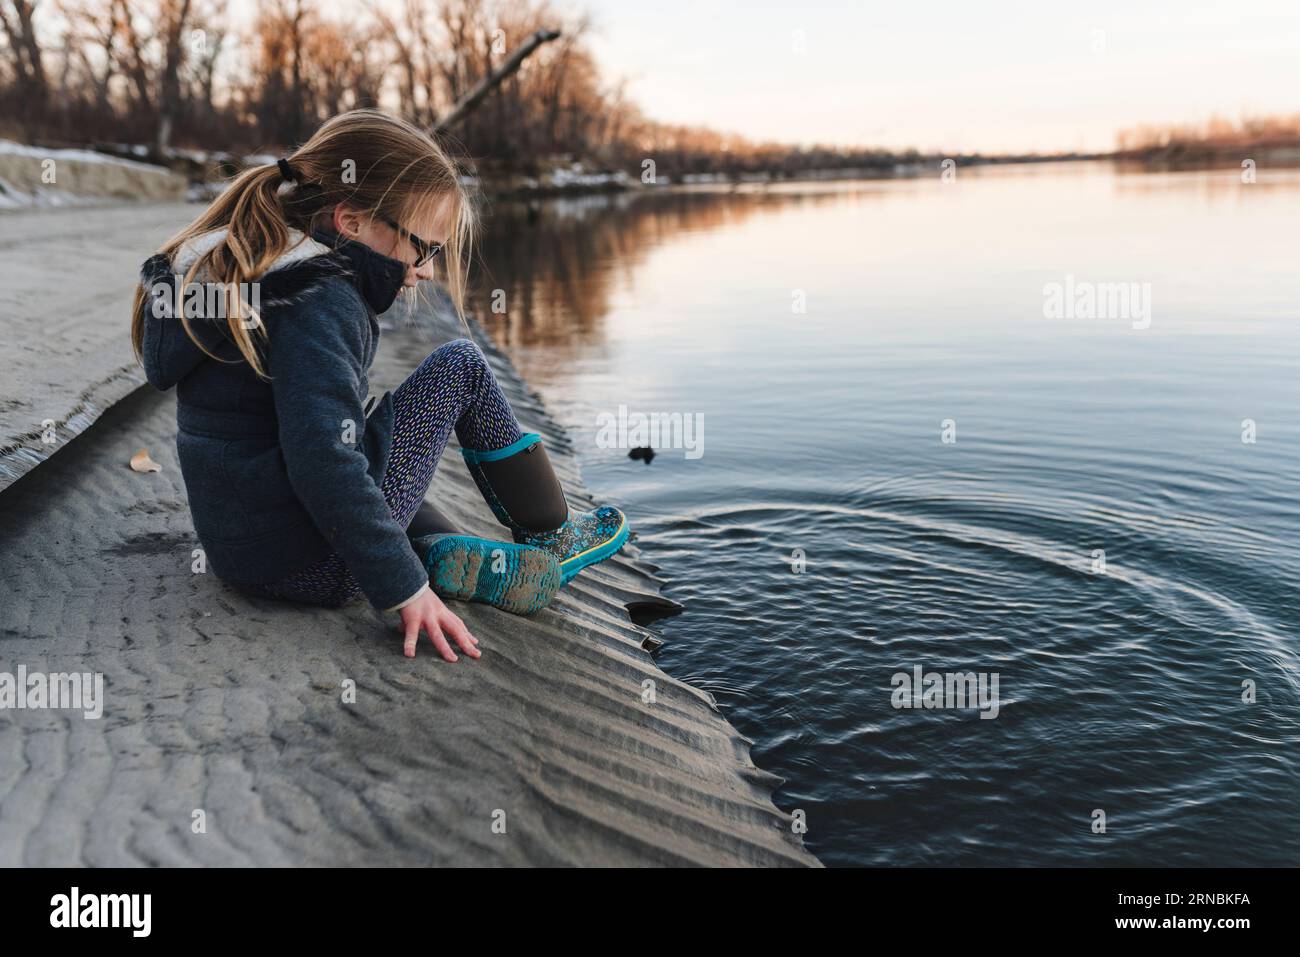 Girl wearing boots sits at edge of Missouri riverbank during fall Stock Photo